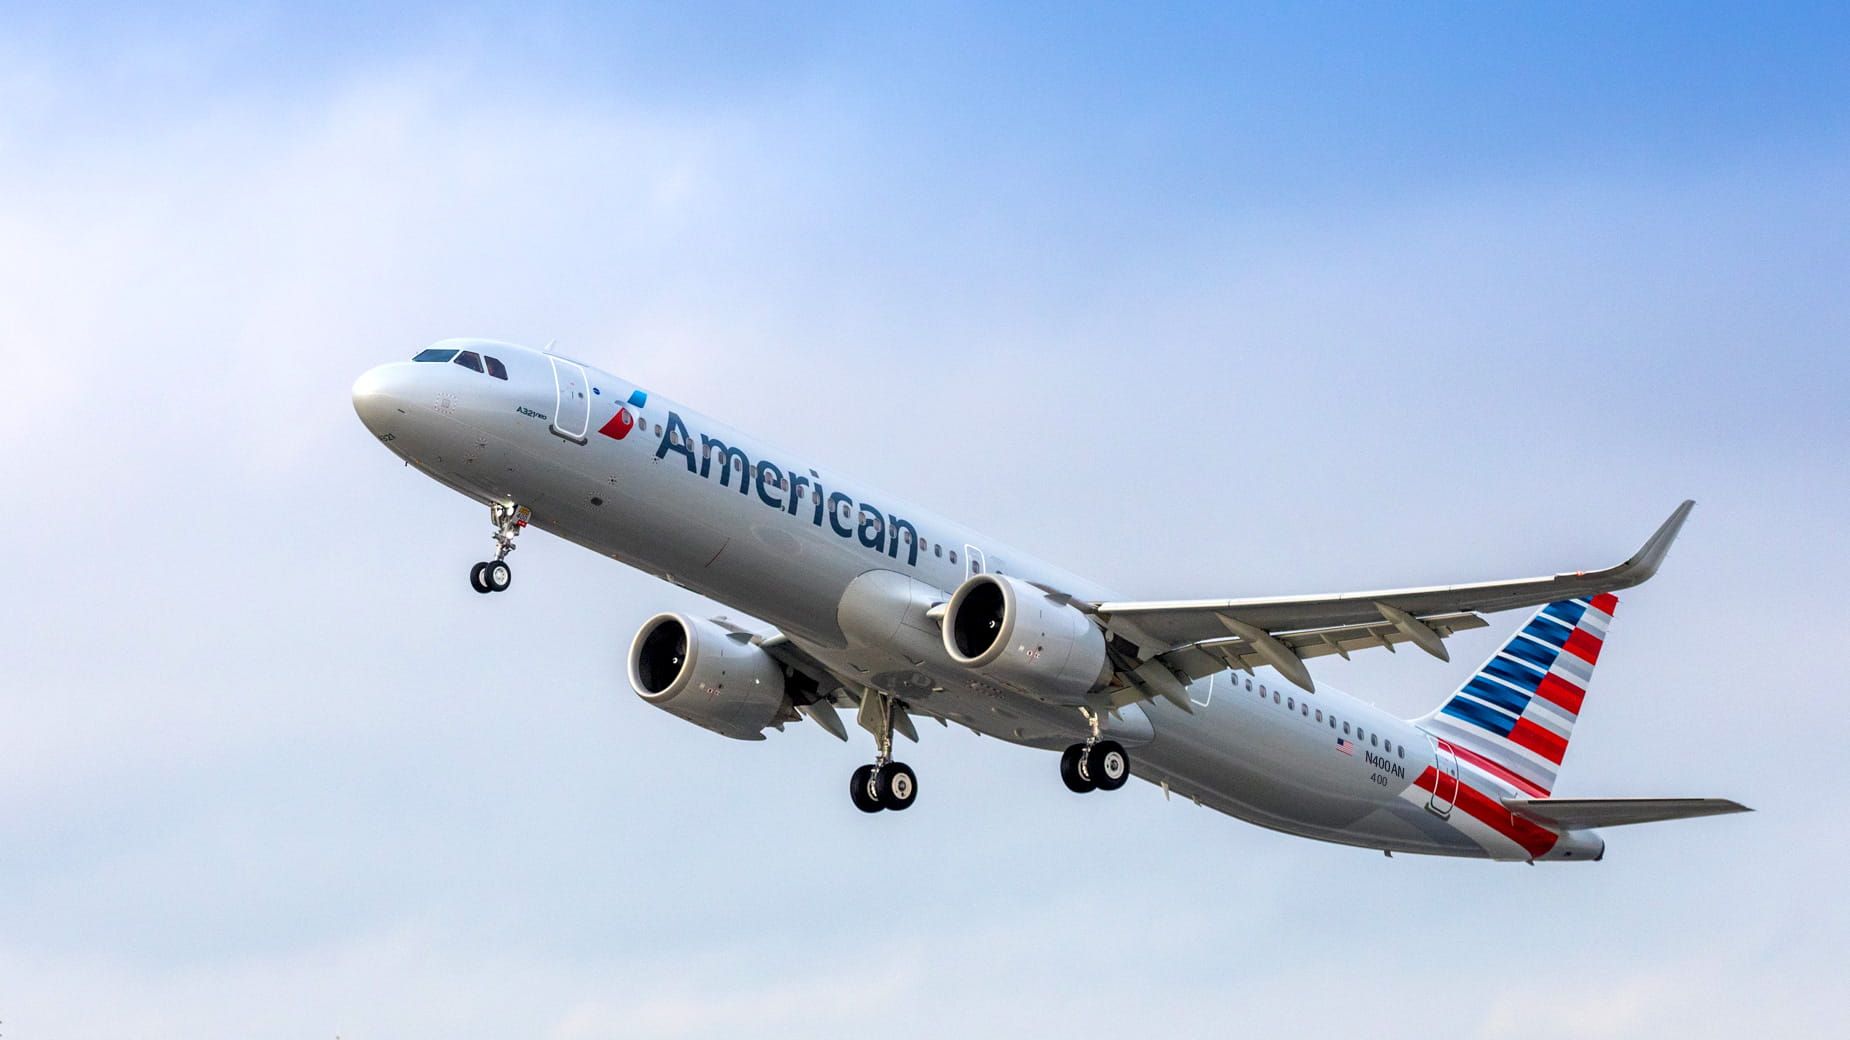 An American Airlines plane taking off, with clear skies in the background